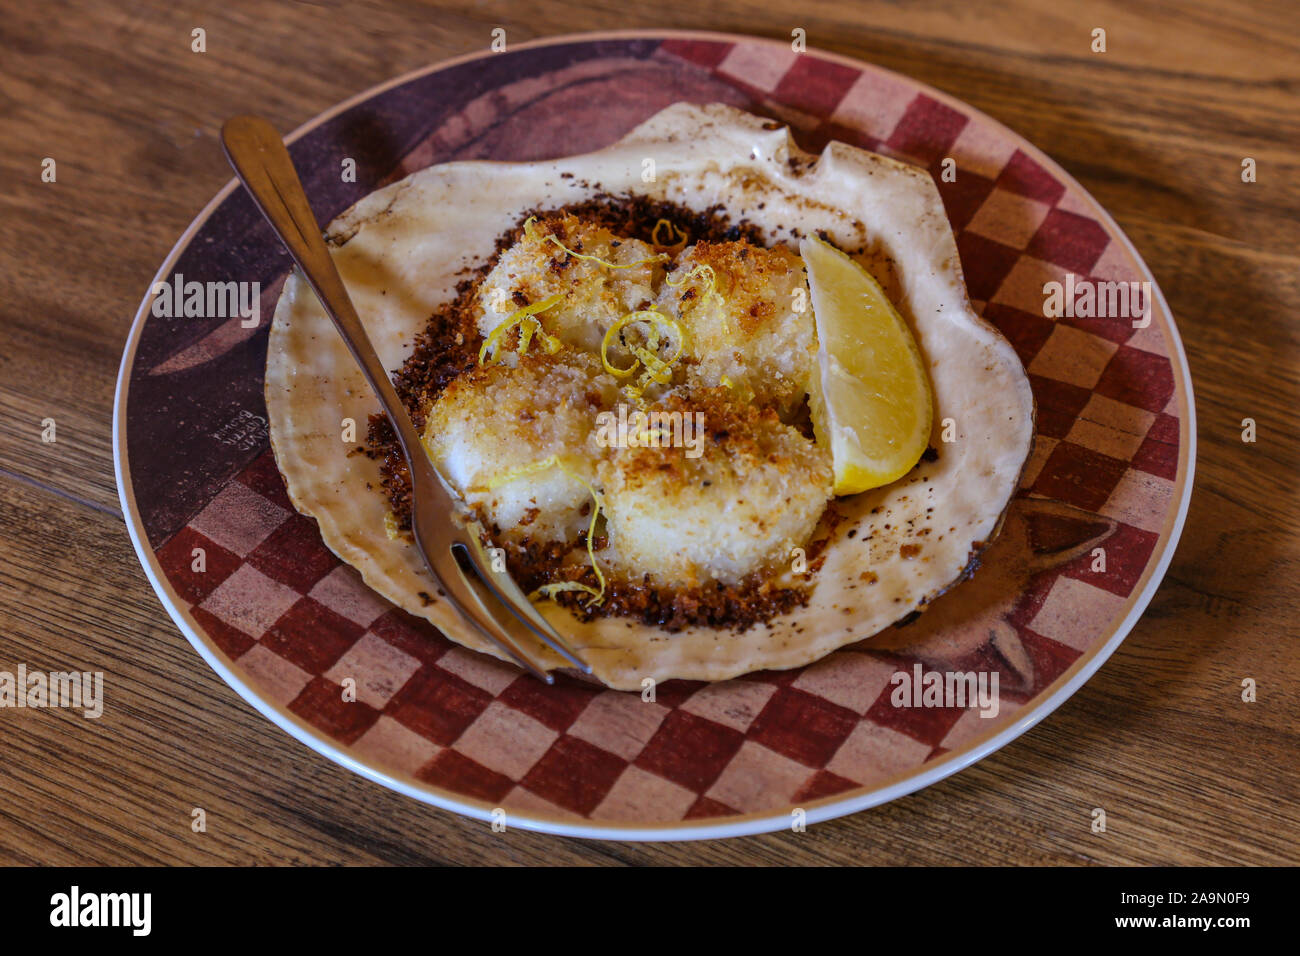 Baked scallops on the half shell served on a plate with seafood fork. Stock Photo